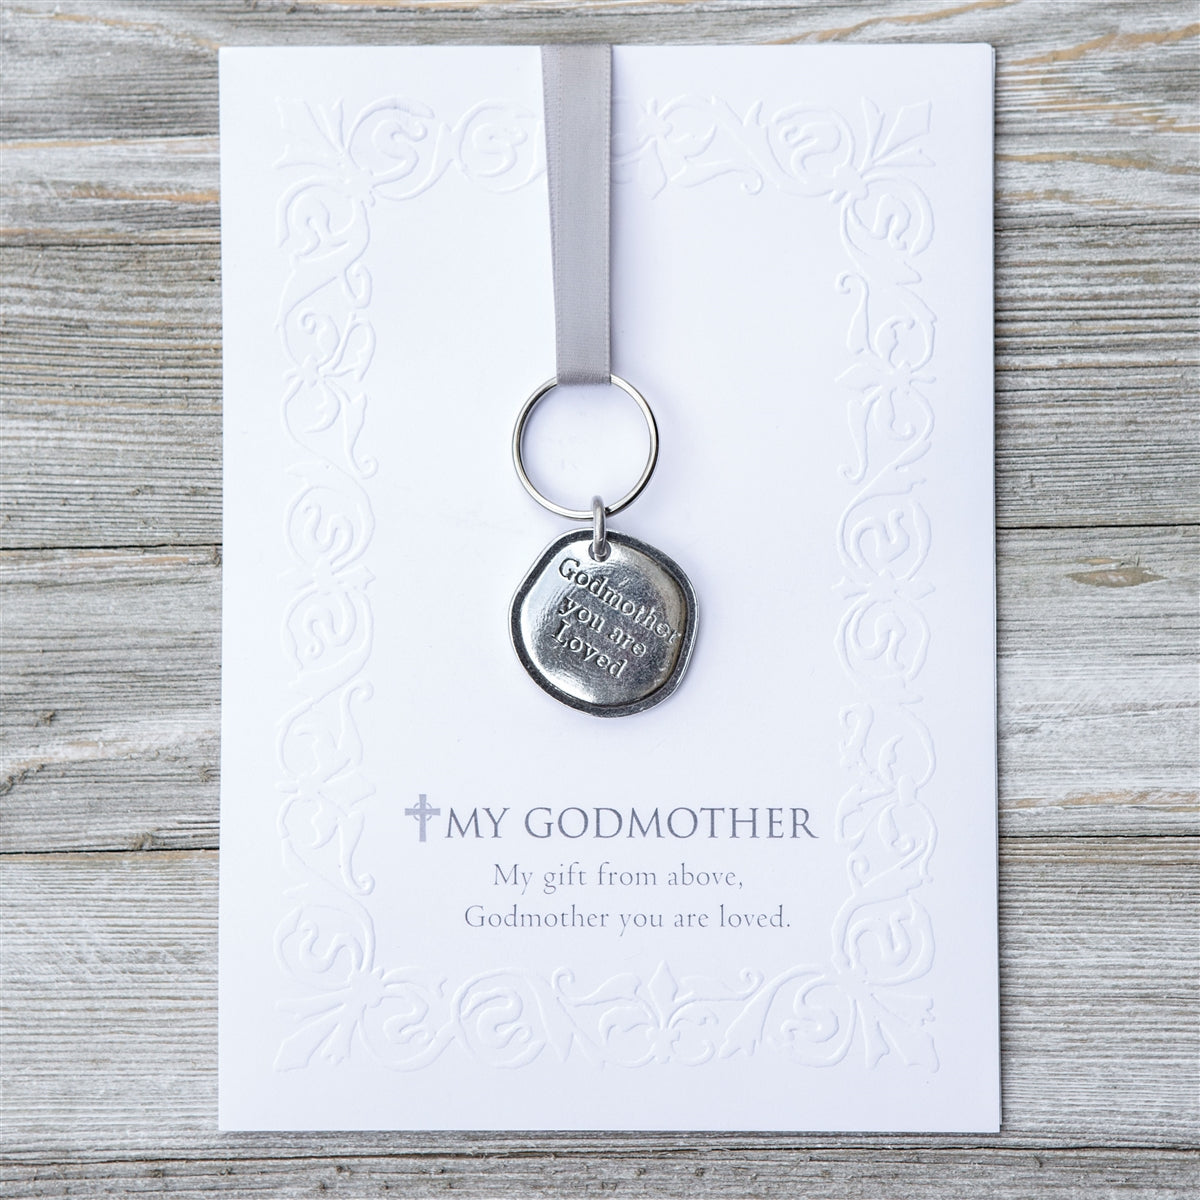 Keychain with pewter coin that says "Godmother you are loved" packaged with an embossed notecard with My Godmother sentiment.